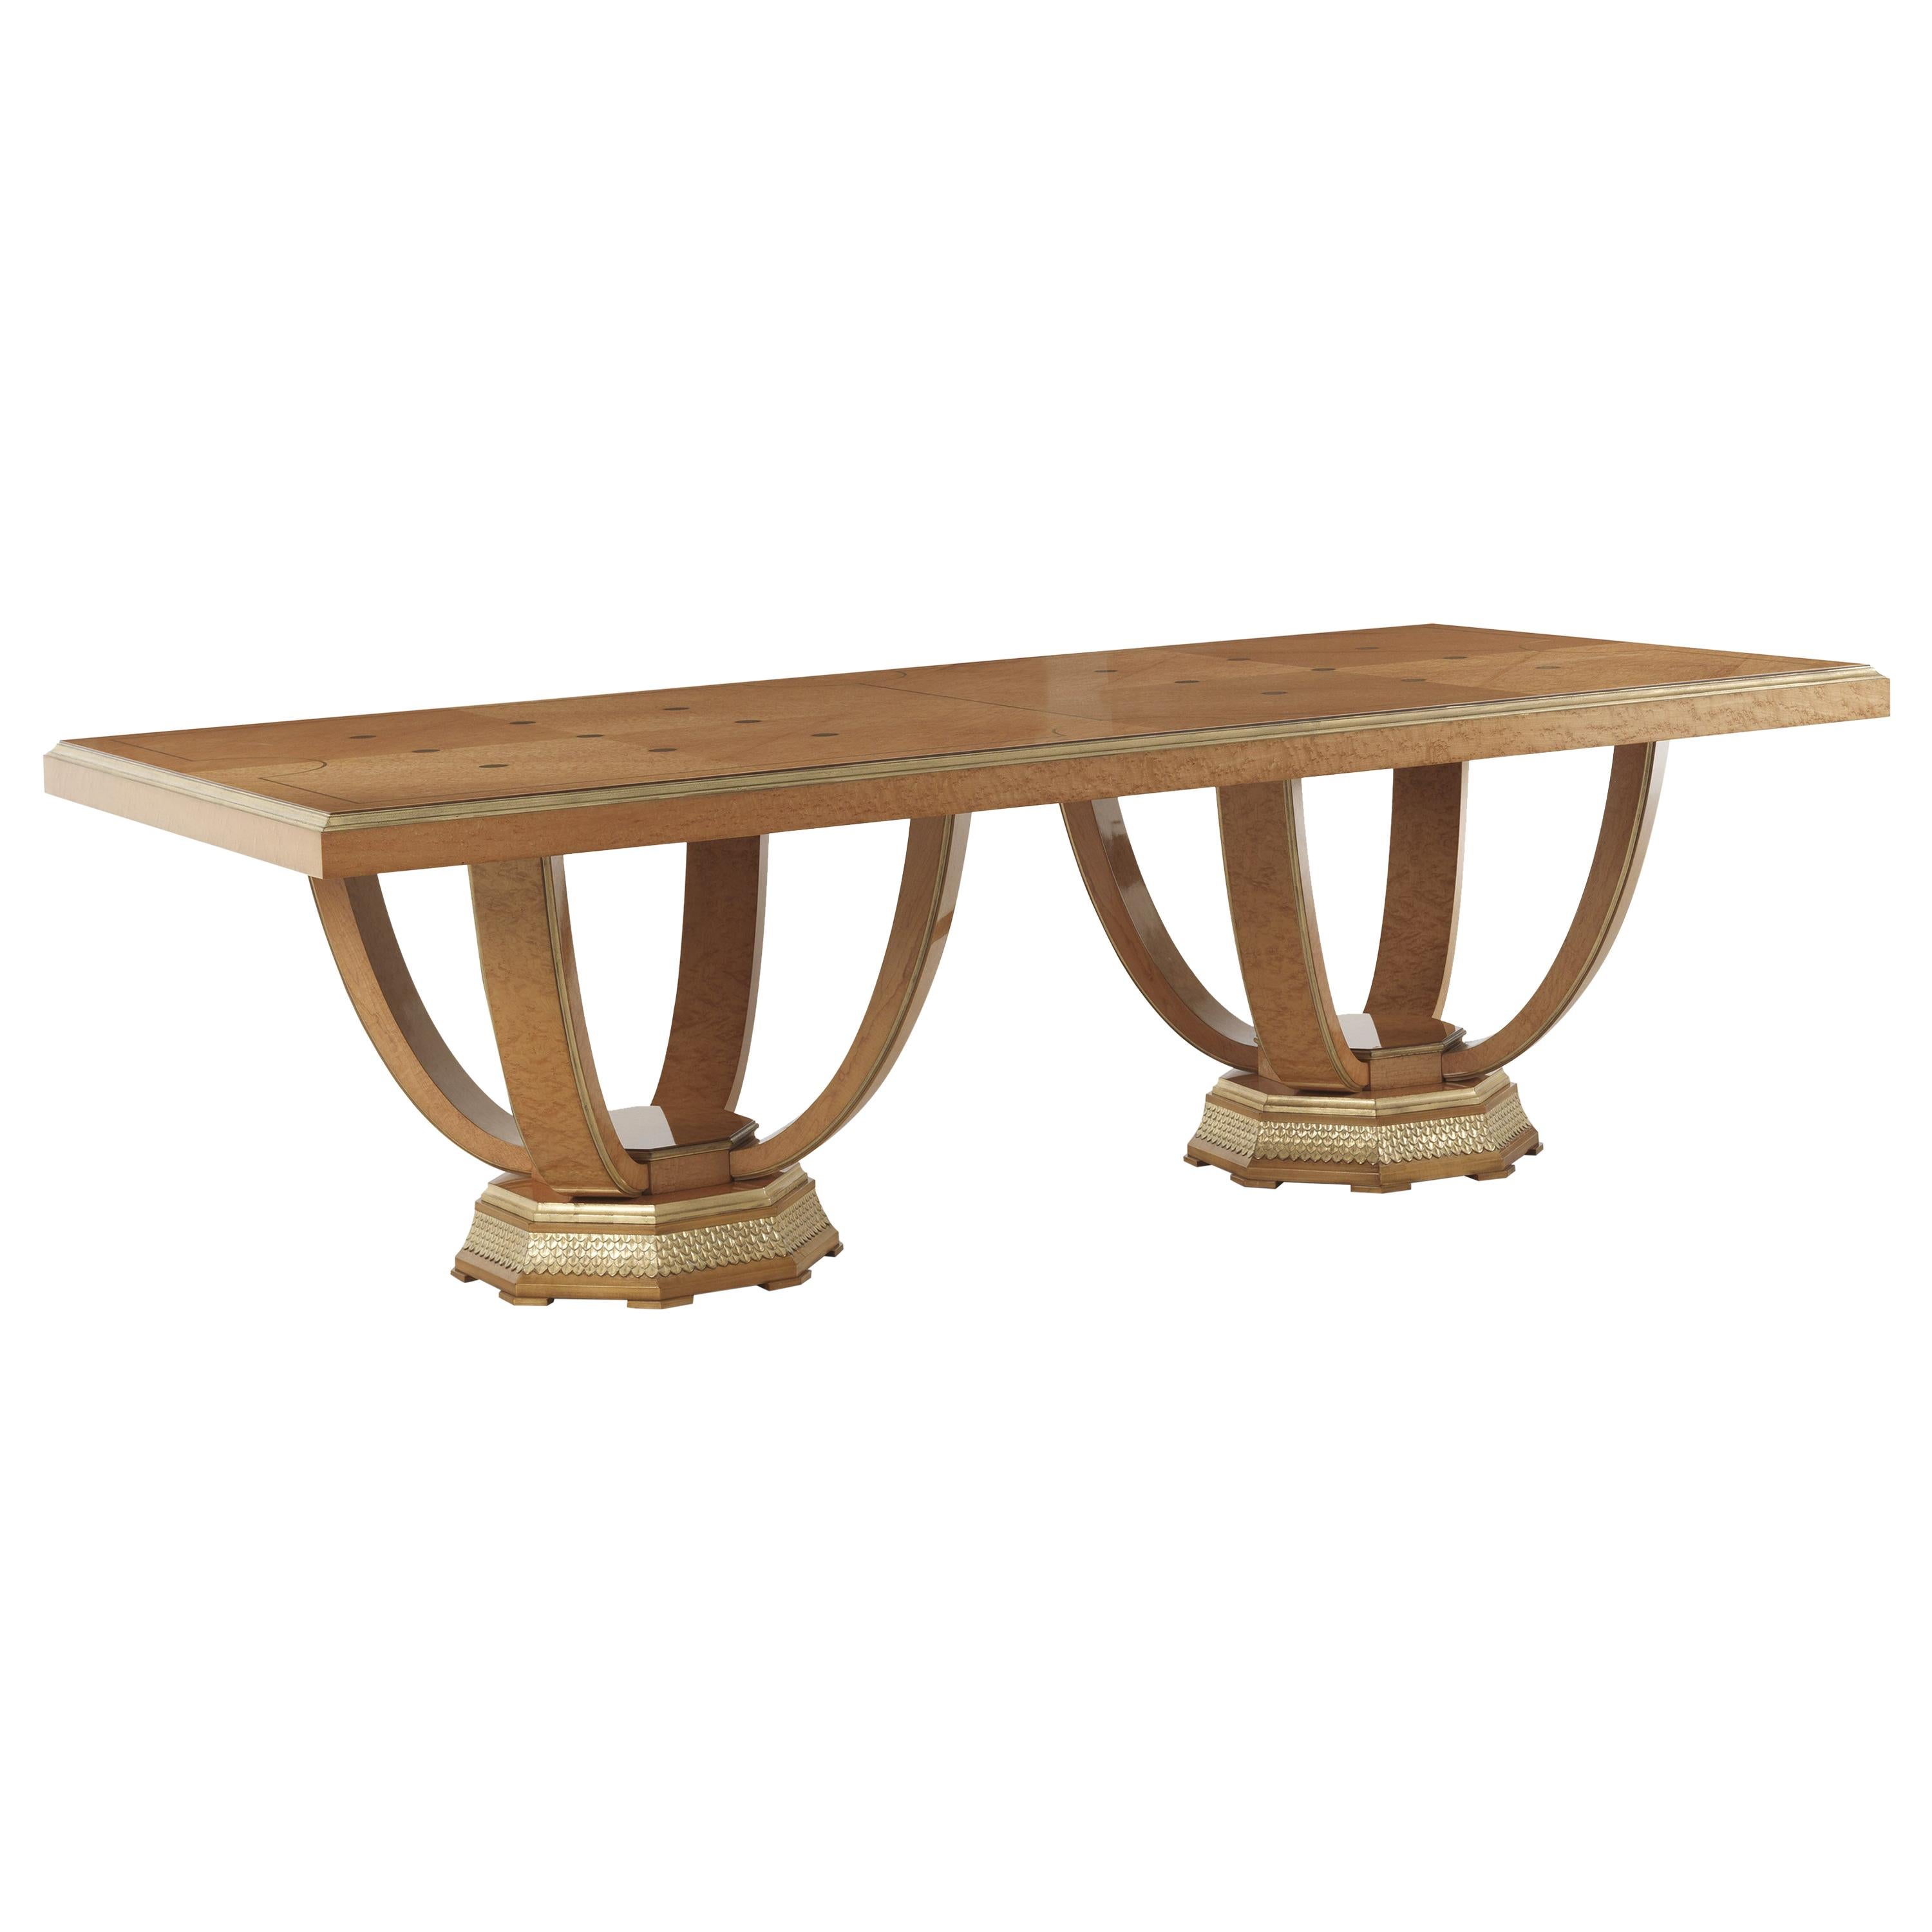 21st Century Pleasure Dining Table in Wood and Top with Brass Inlays